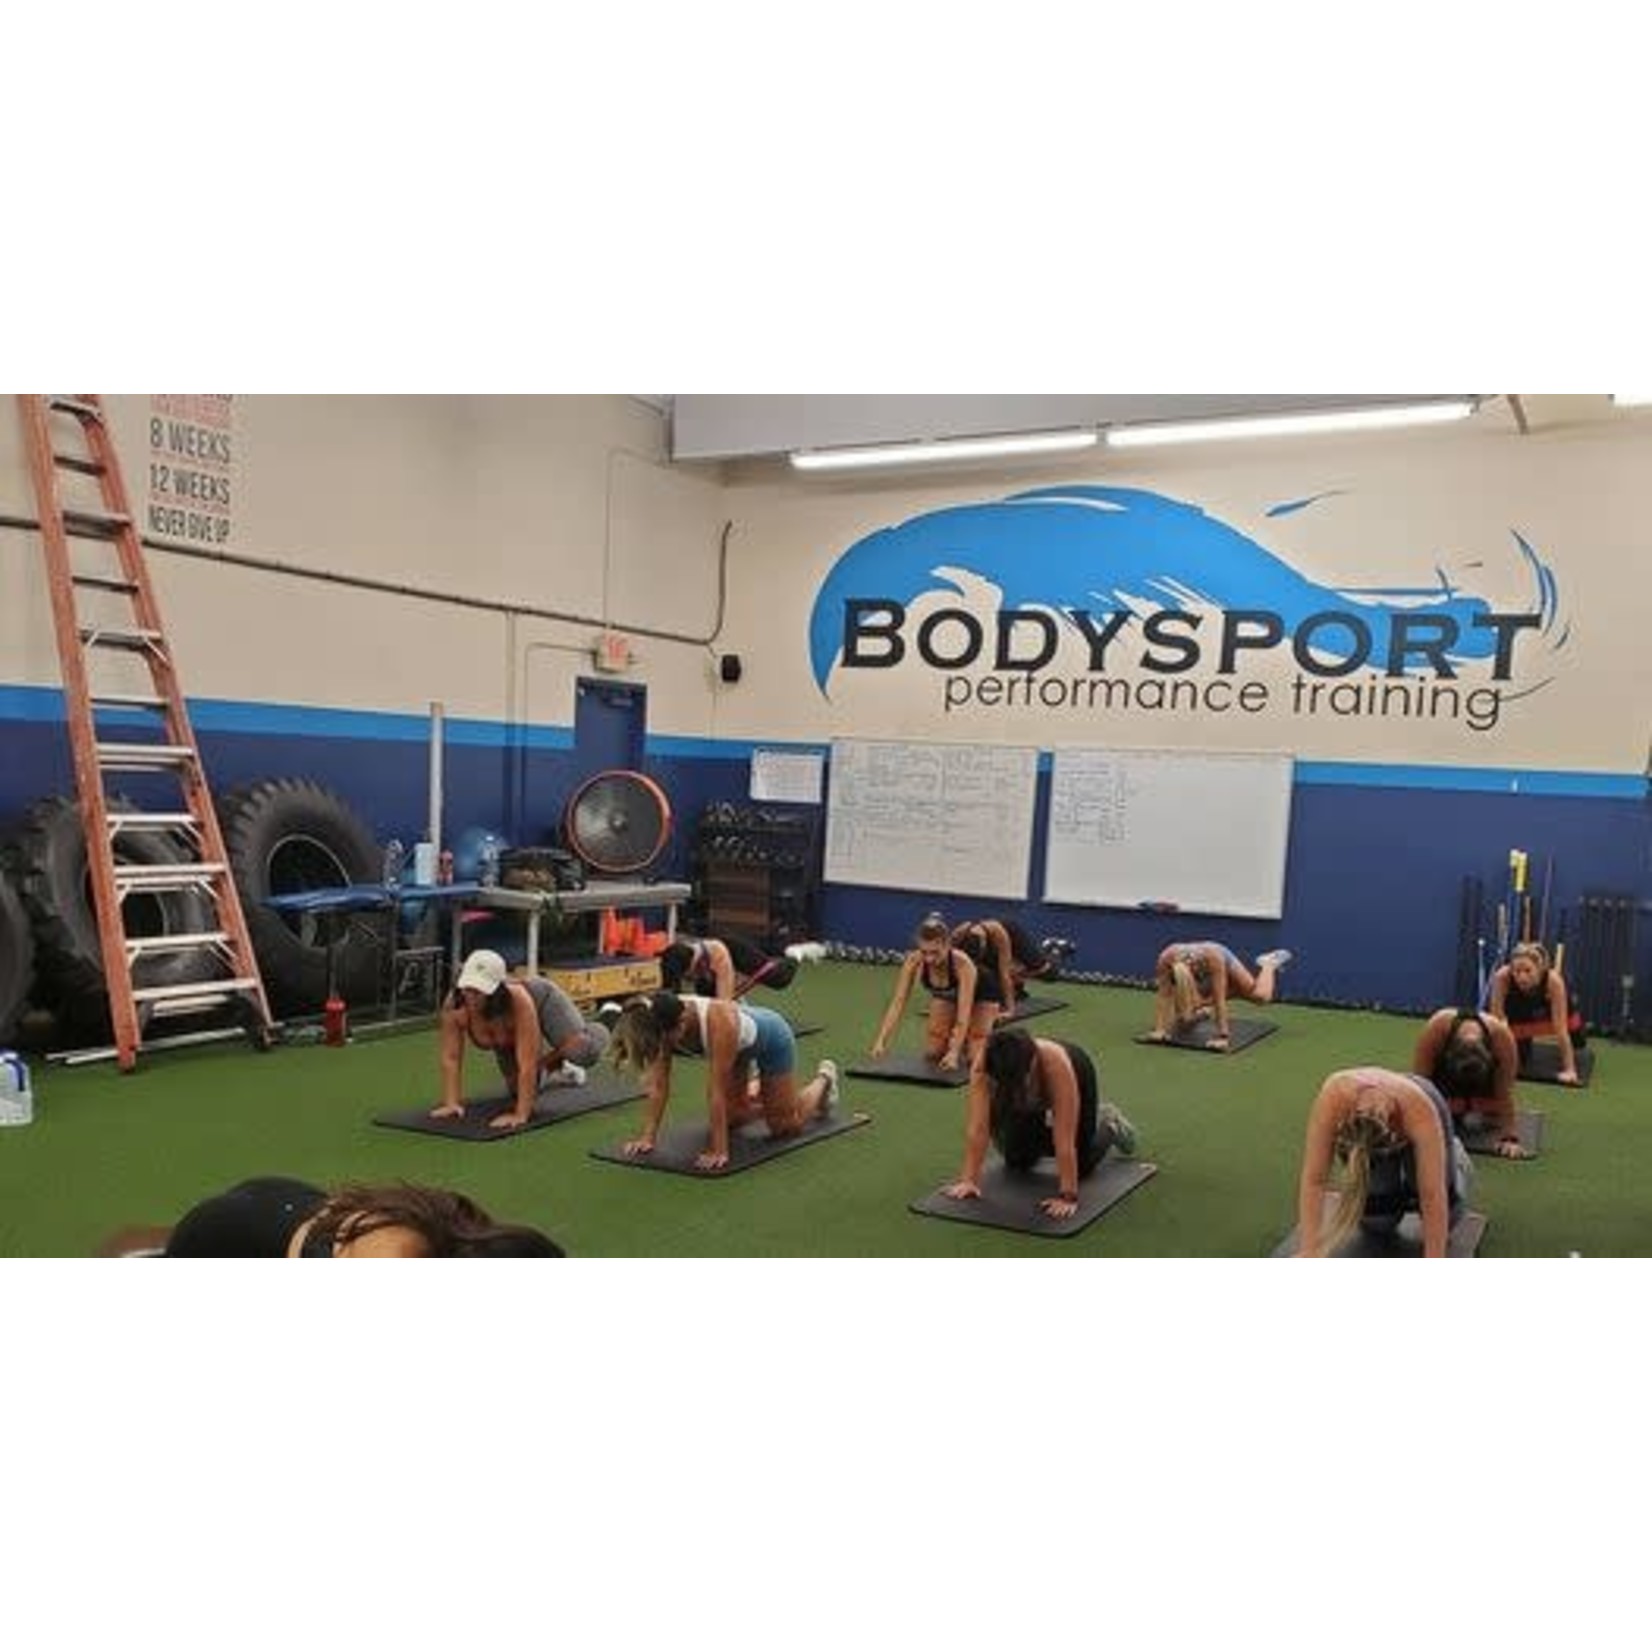 Body Sports Fitness Center Body Sports Fitness Center $50 - (7) Day Training Session